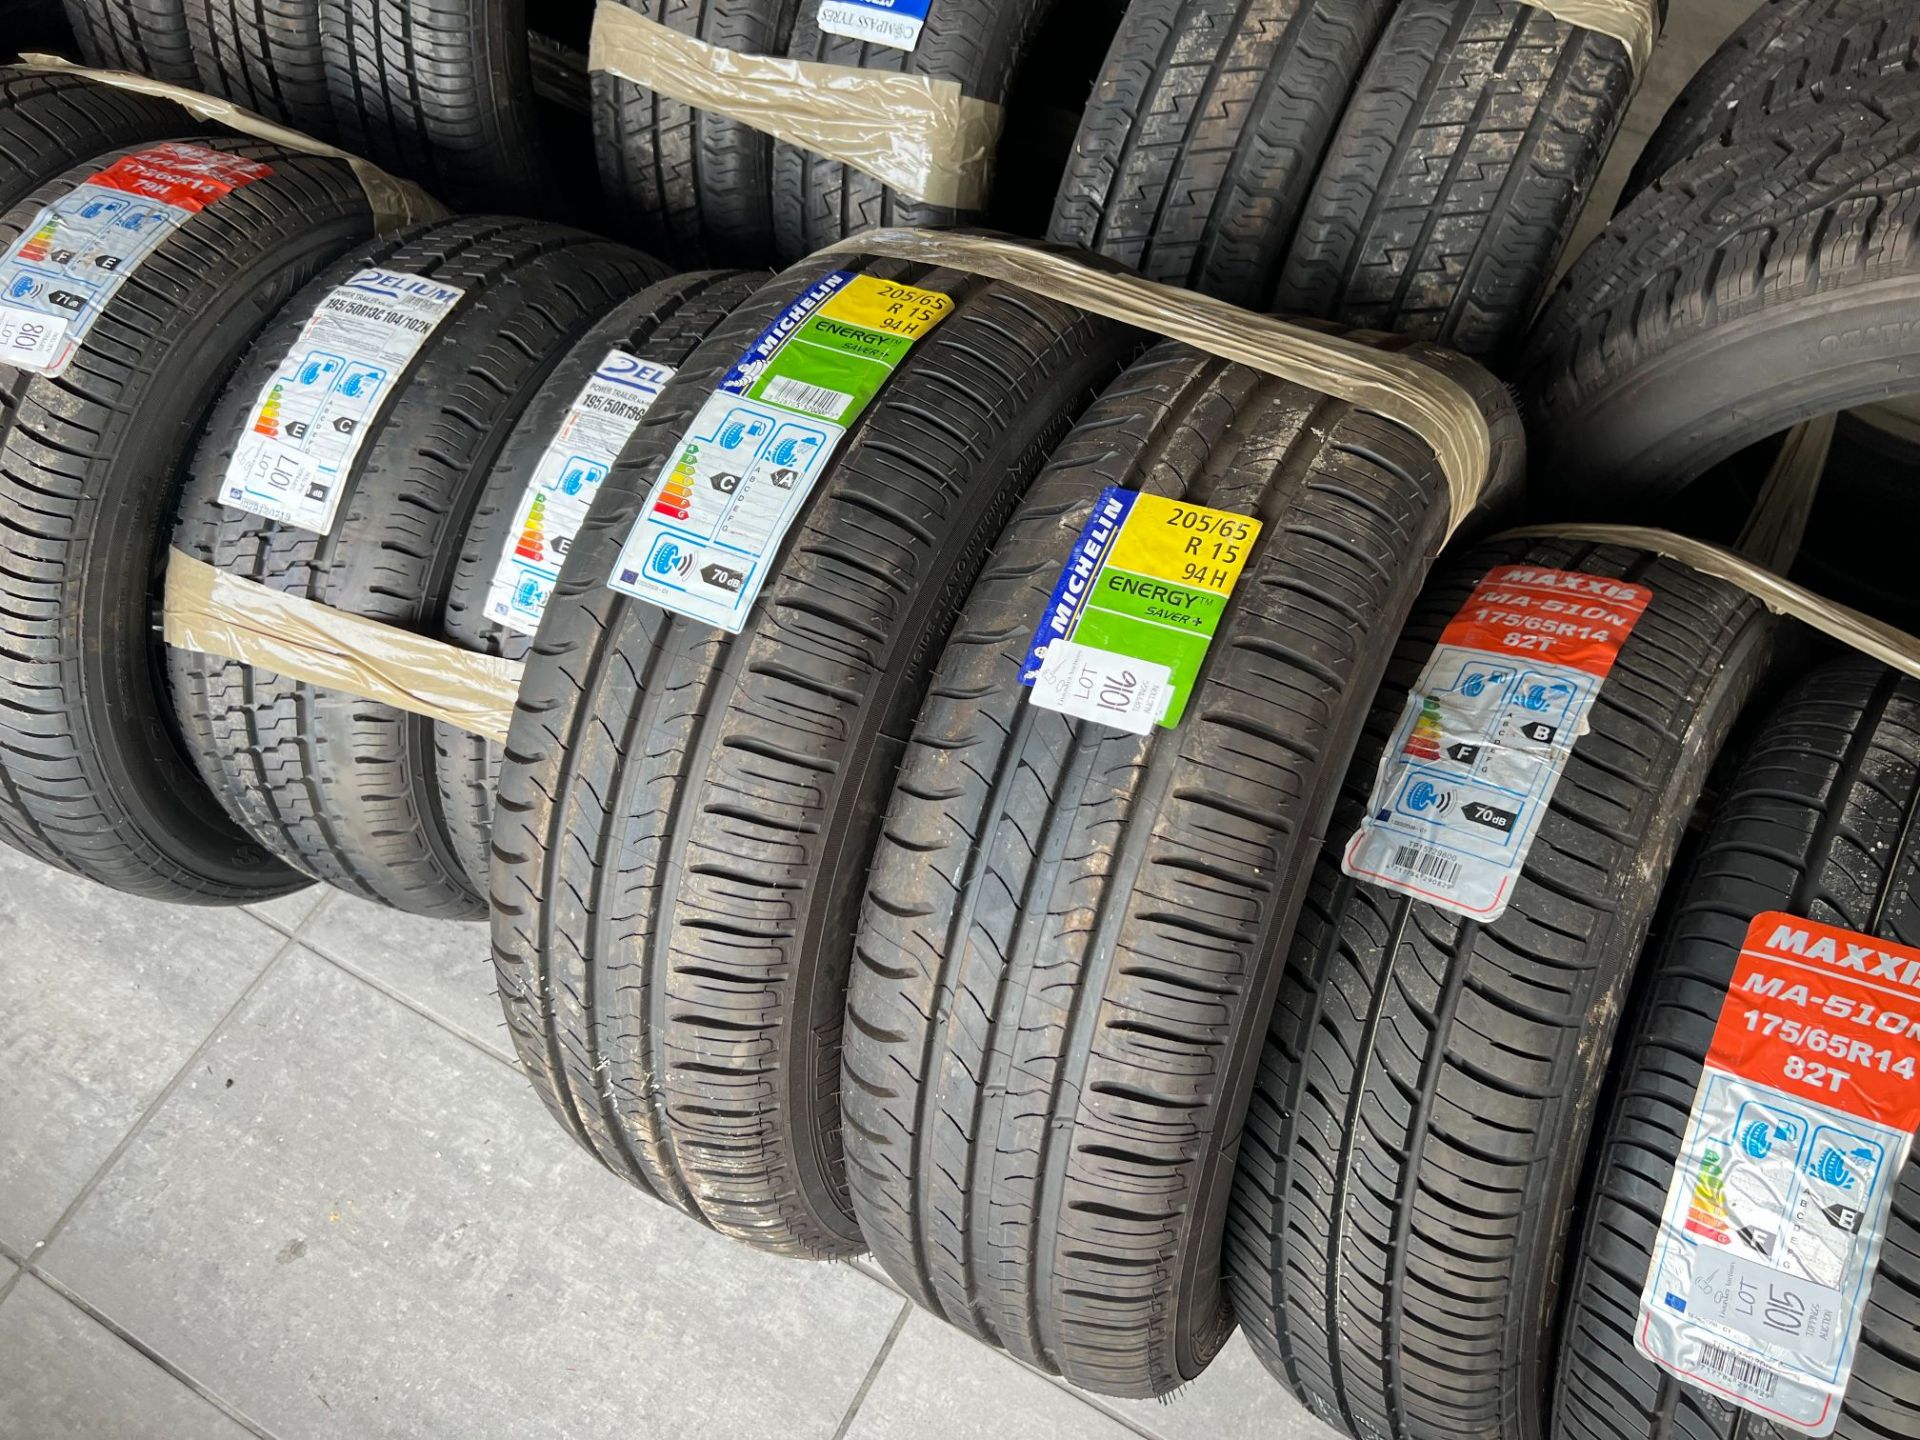 2X MICHELIN 205/65/R15 TYRES (NEW)